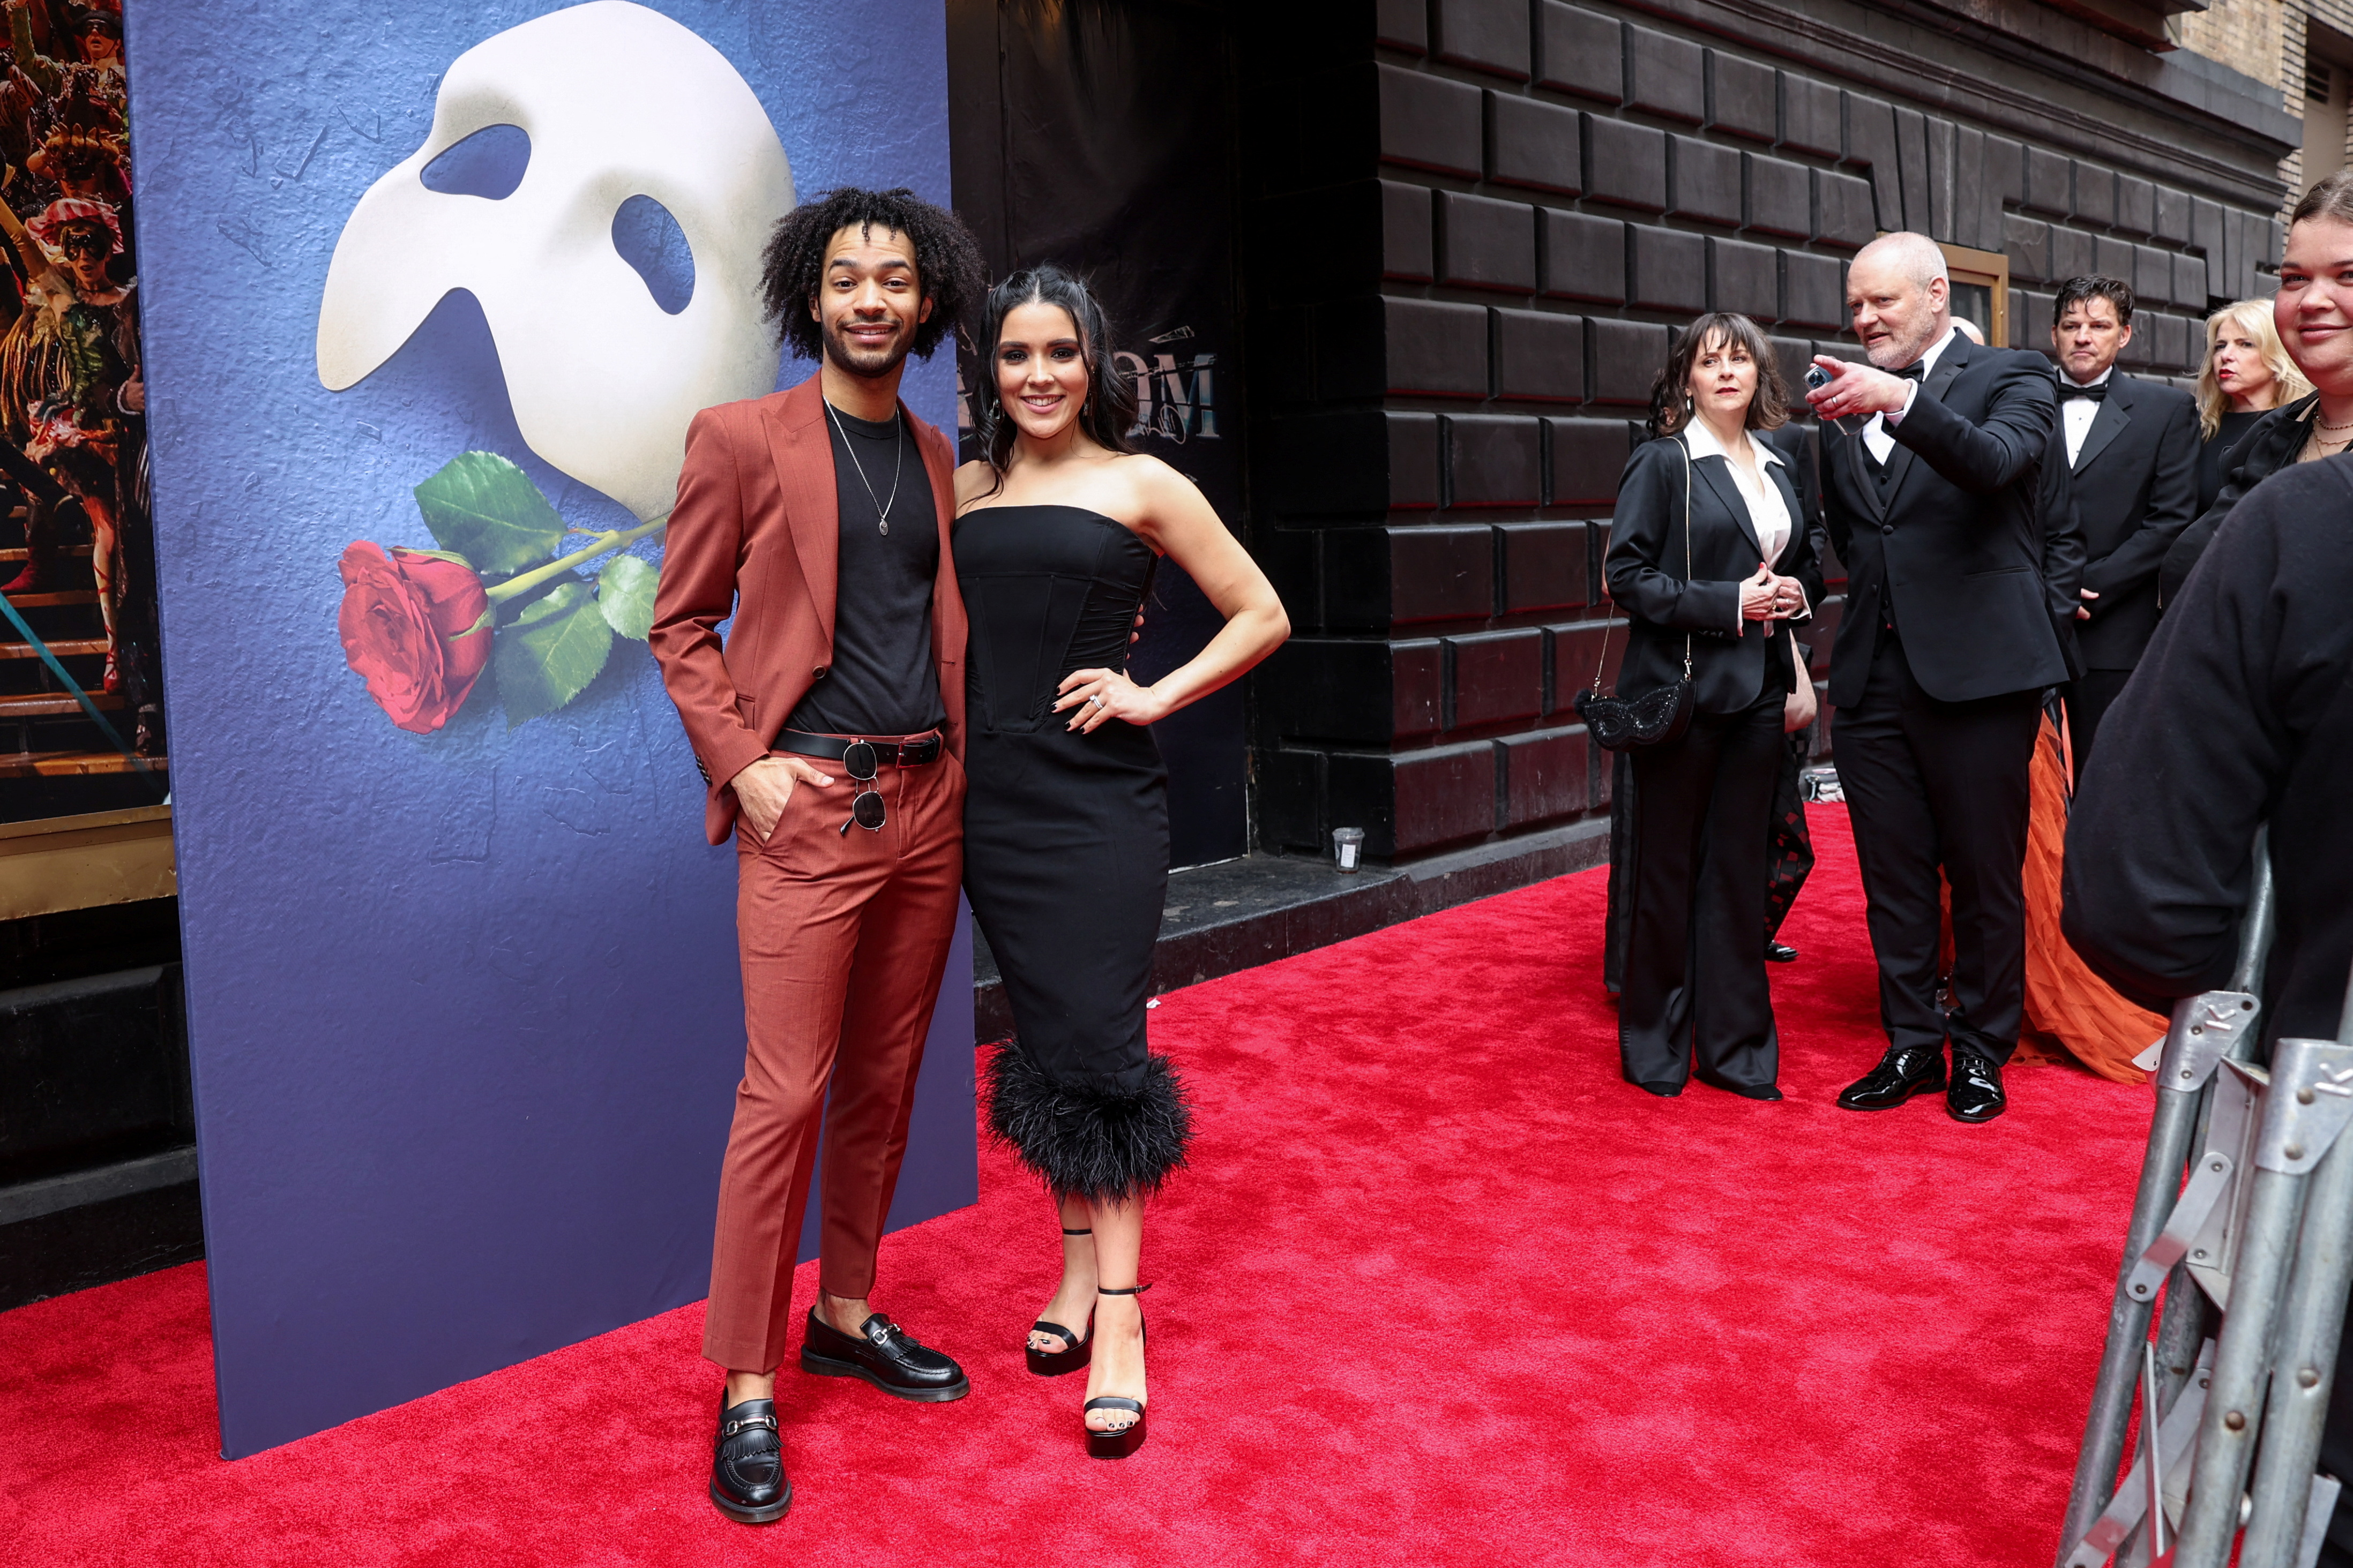 Jordan Dobson and Linedy Genao during their time on the red carpet.  (PHOTO: REUTERS/Caitlin Ochs)